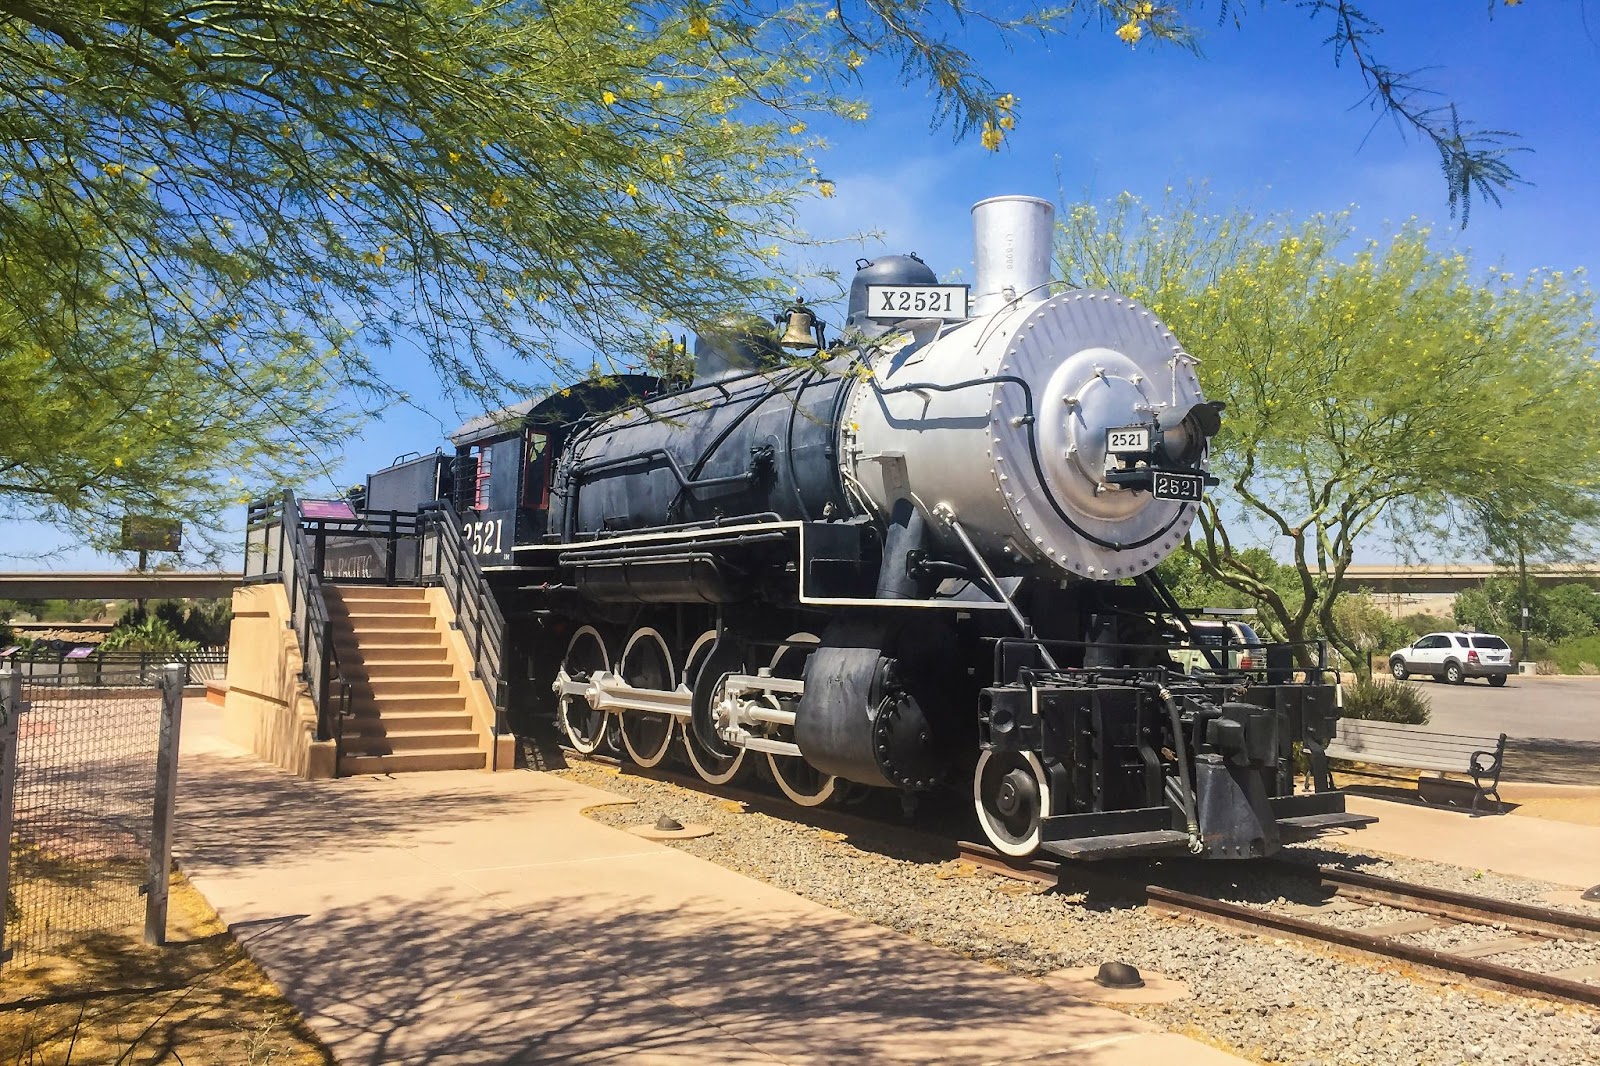 Traveling to Yuma? Here Are 11 Activities to Put on Your Must-Do List.